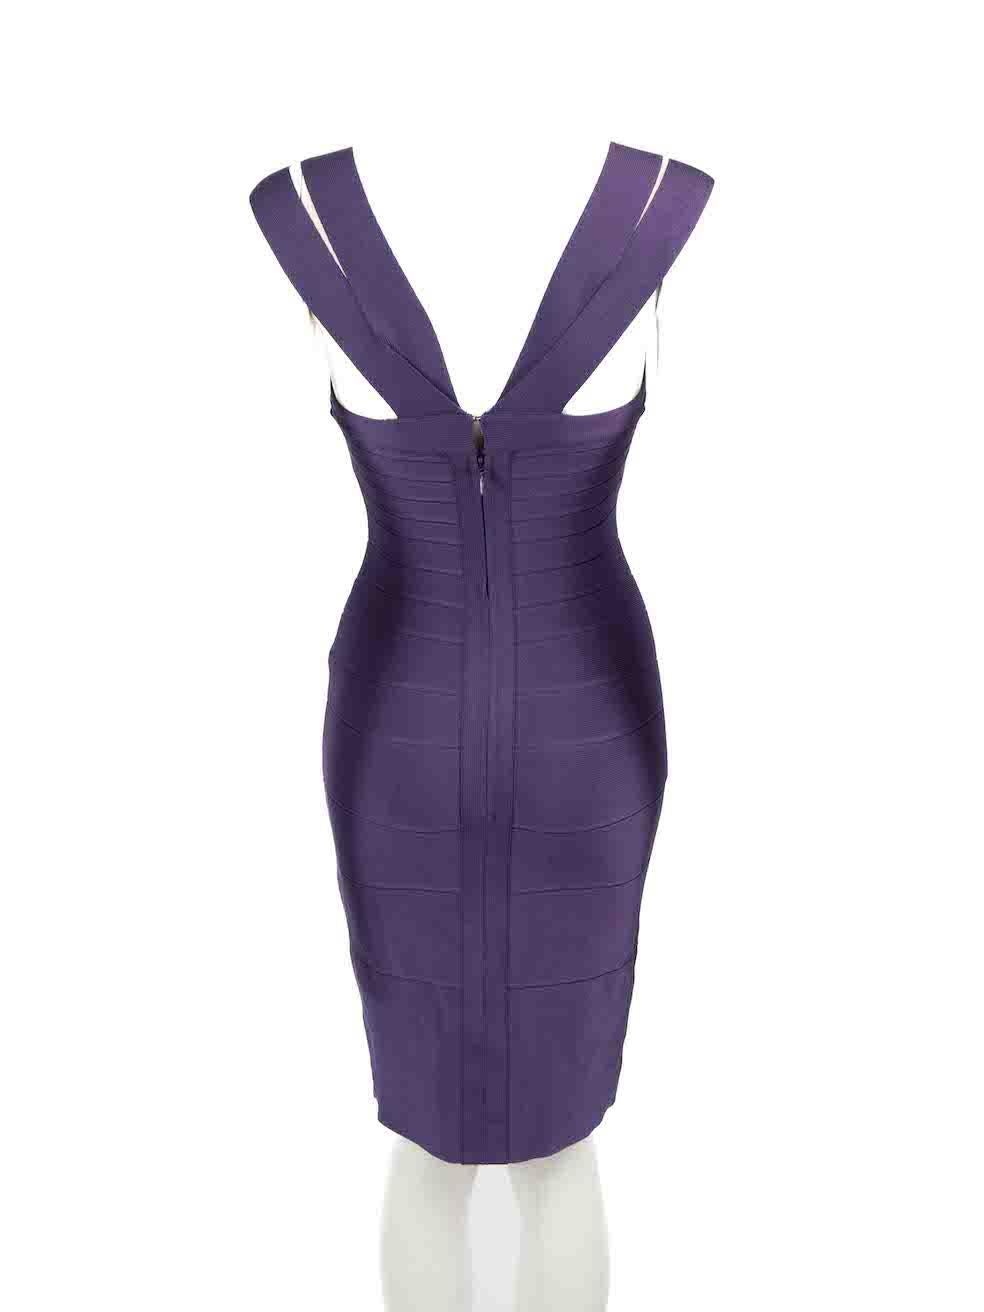 Herve Leger Purple Square Neck Bodycon Dress Size XS In Good Condition For Sale In London, GB